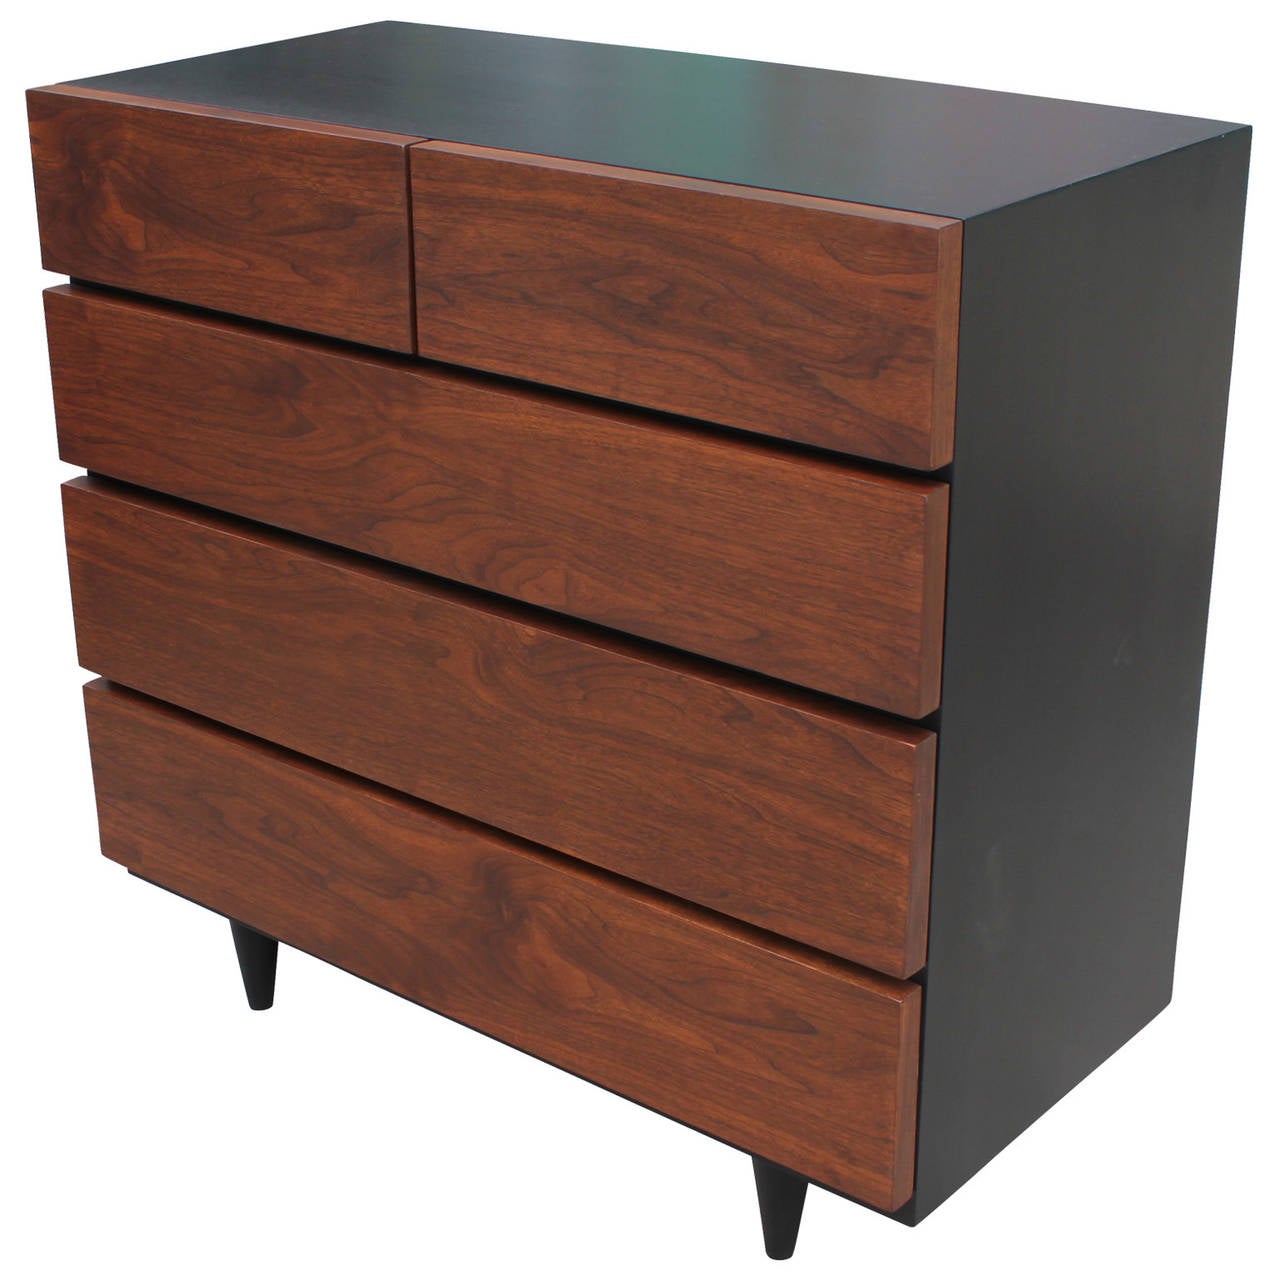 Clean lined dresser by American of Martinsville. Dresser drawers are finished in walnut while the case is finished in a dark ebony. Five drawers provide excellent storage. Matching dresser available.